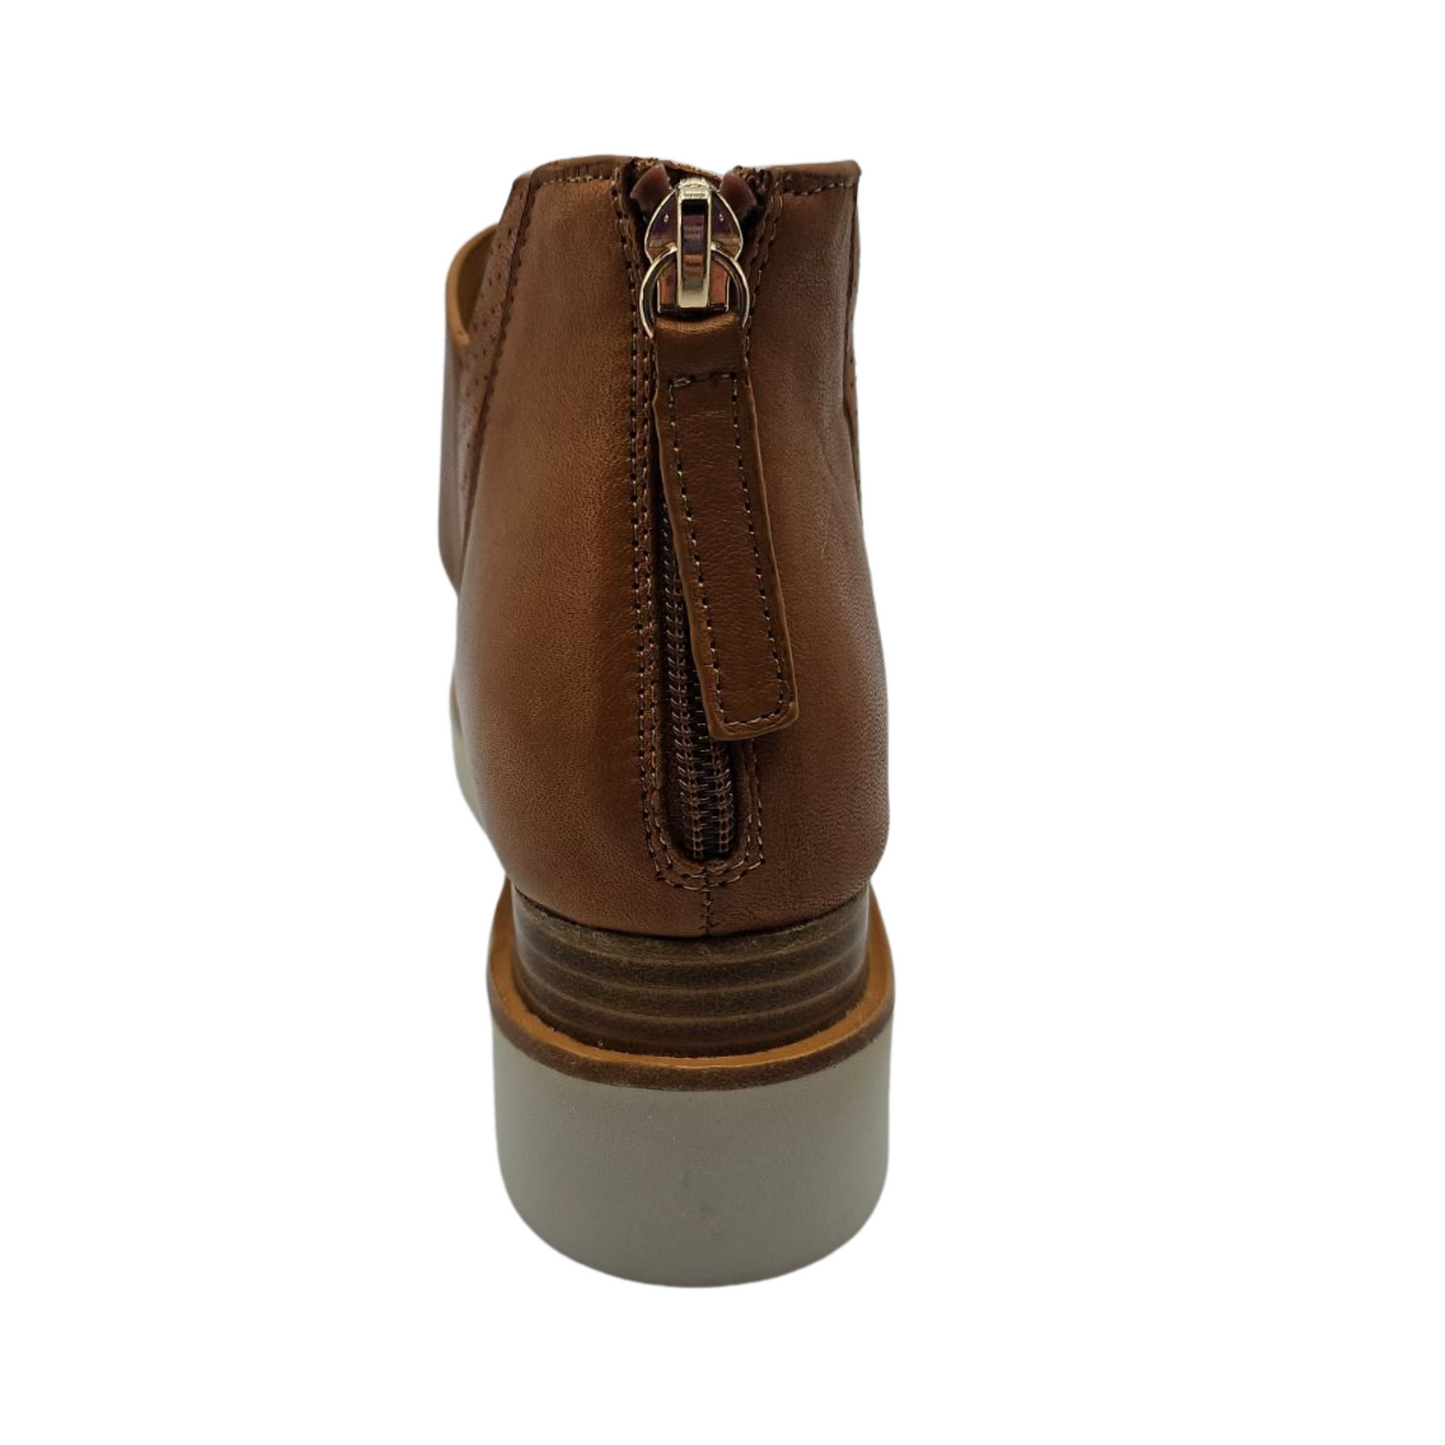 Back view of brown leather sandals with back zipper closure, white platform sole and open toe